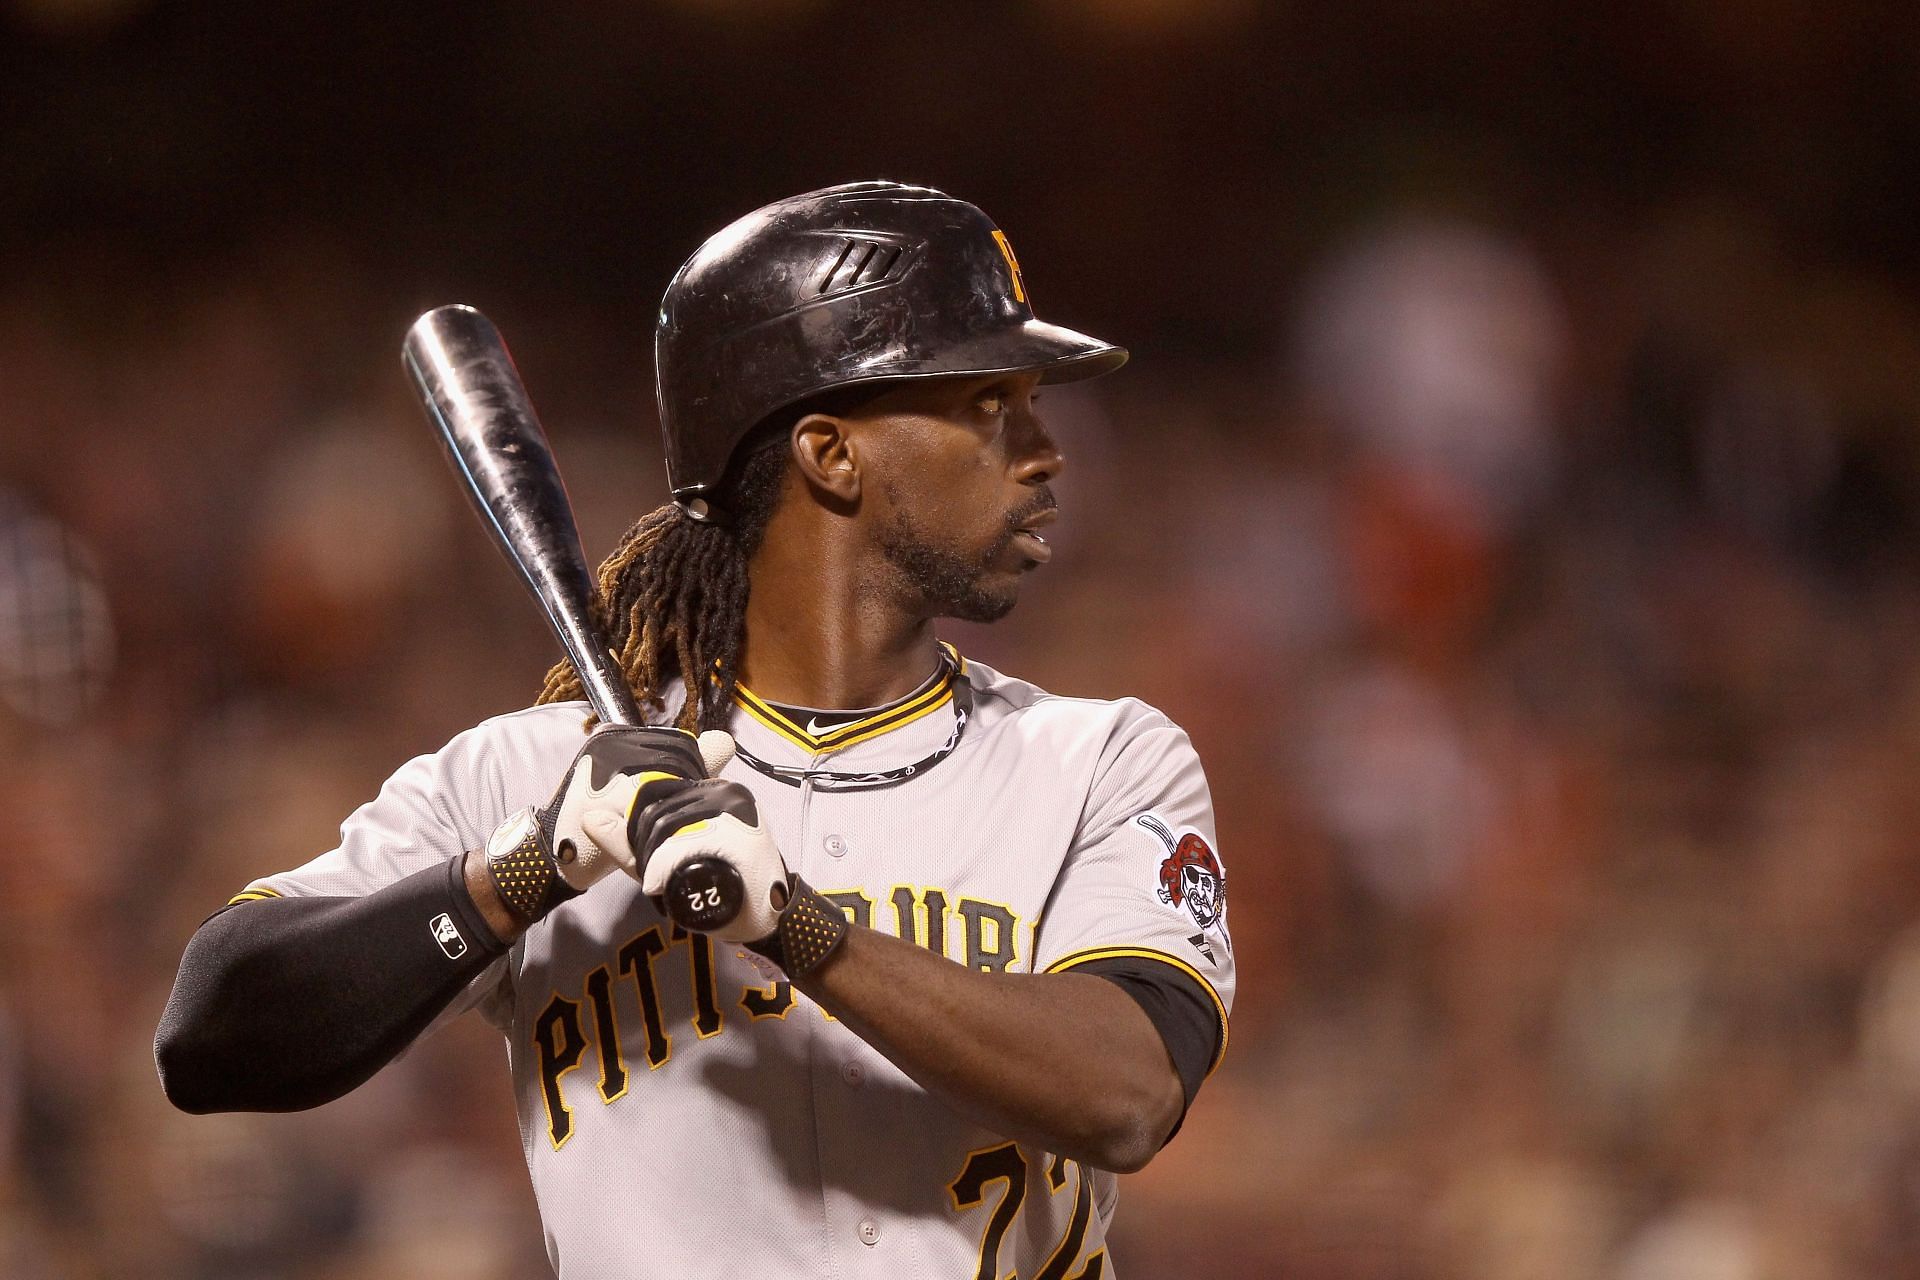 Pirates take out struggling Andrew McCutchen in double-switch - NBC Sports